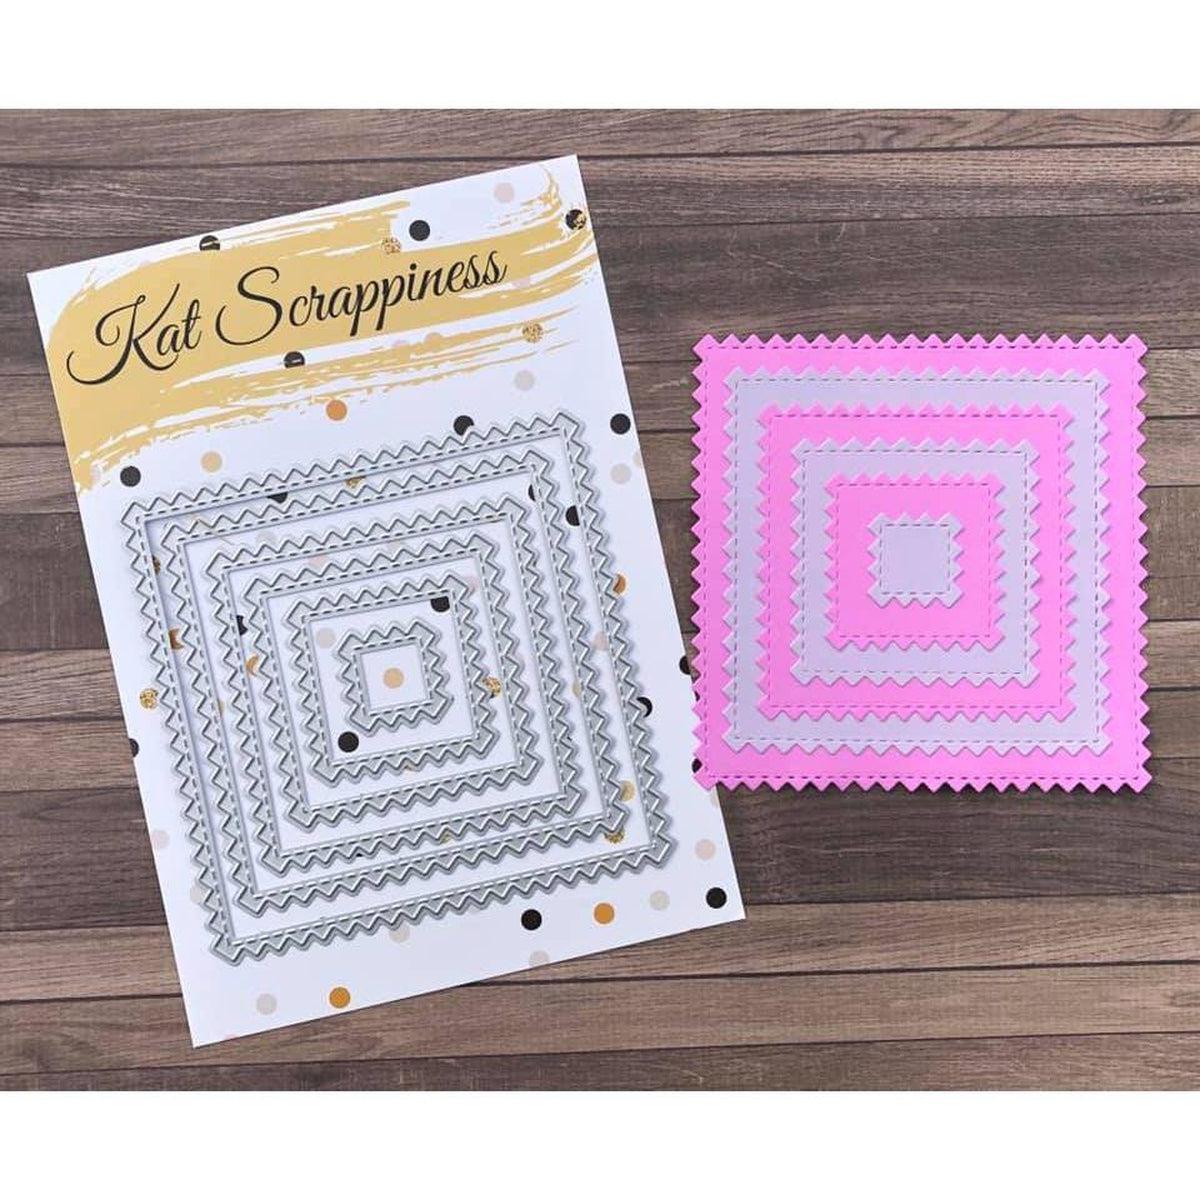 Zig Zag Square Dies by Kat Scrappiness - Kat Scrappiness